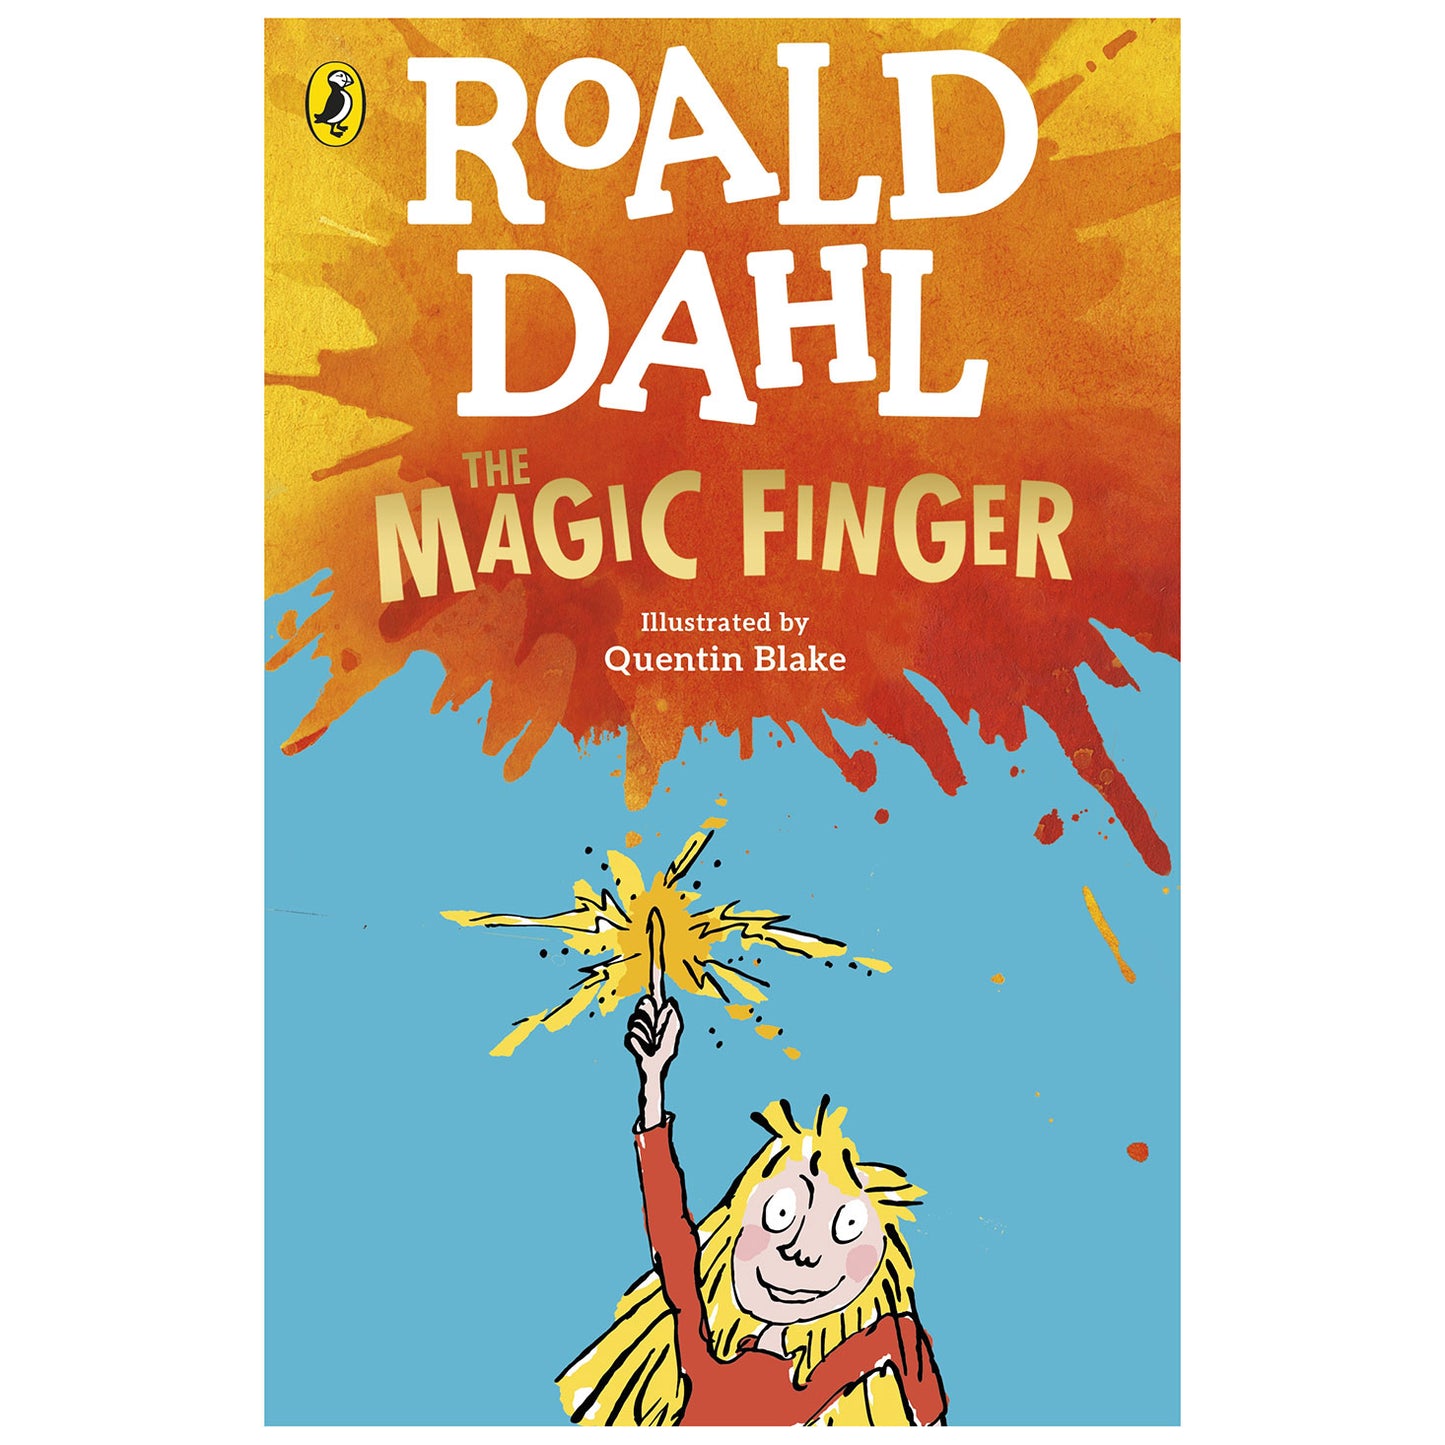 The Magic Finger by Roald Dahl with illustrations by Quentin Blake